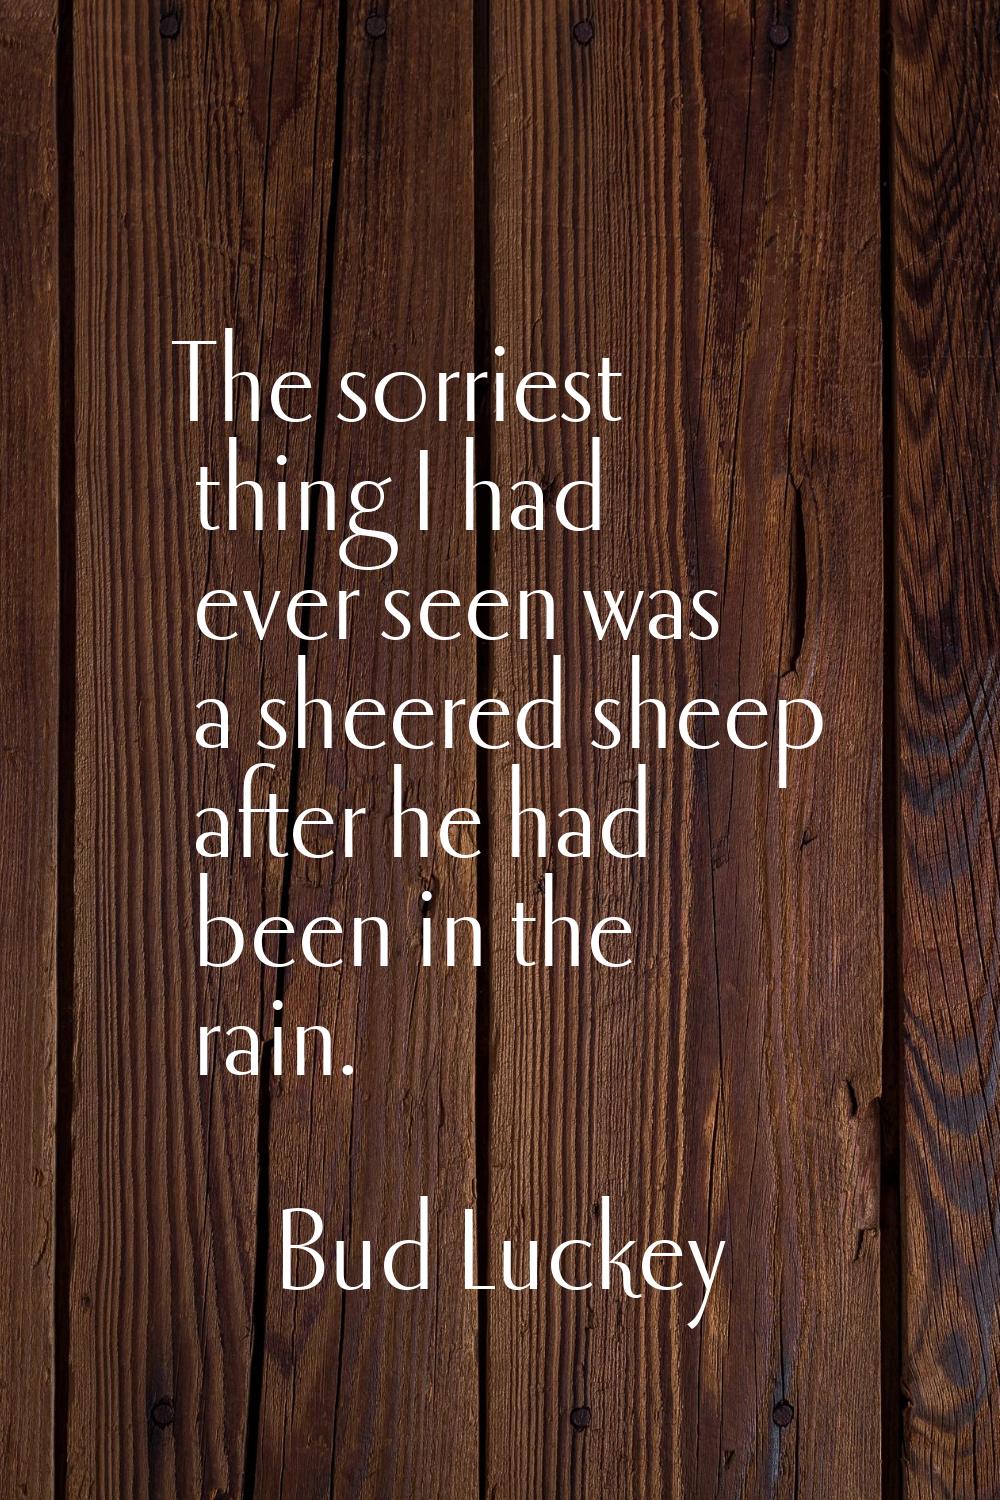 The sorriest thing I had ever seen was a sheered sheep after he had been in the rain.